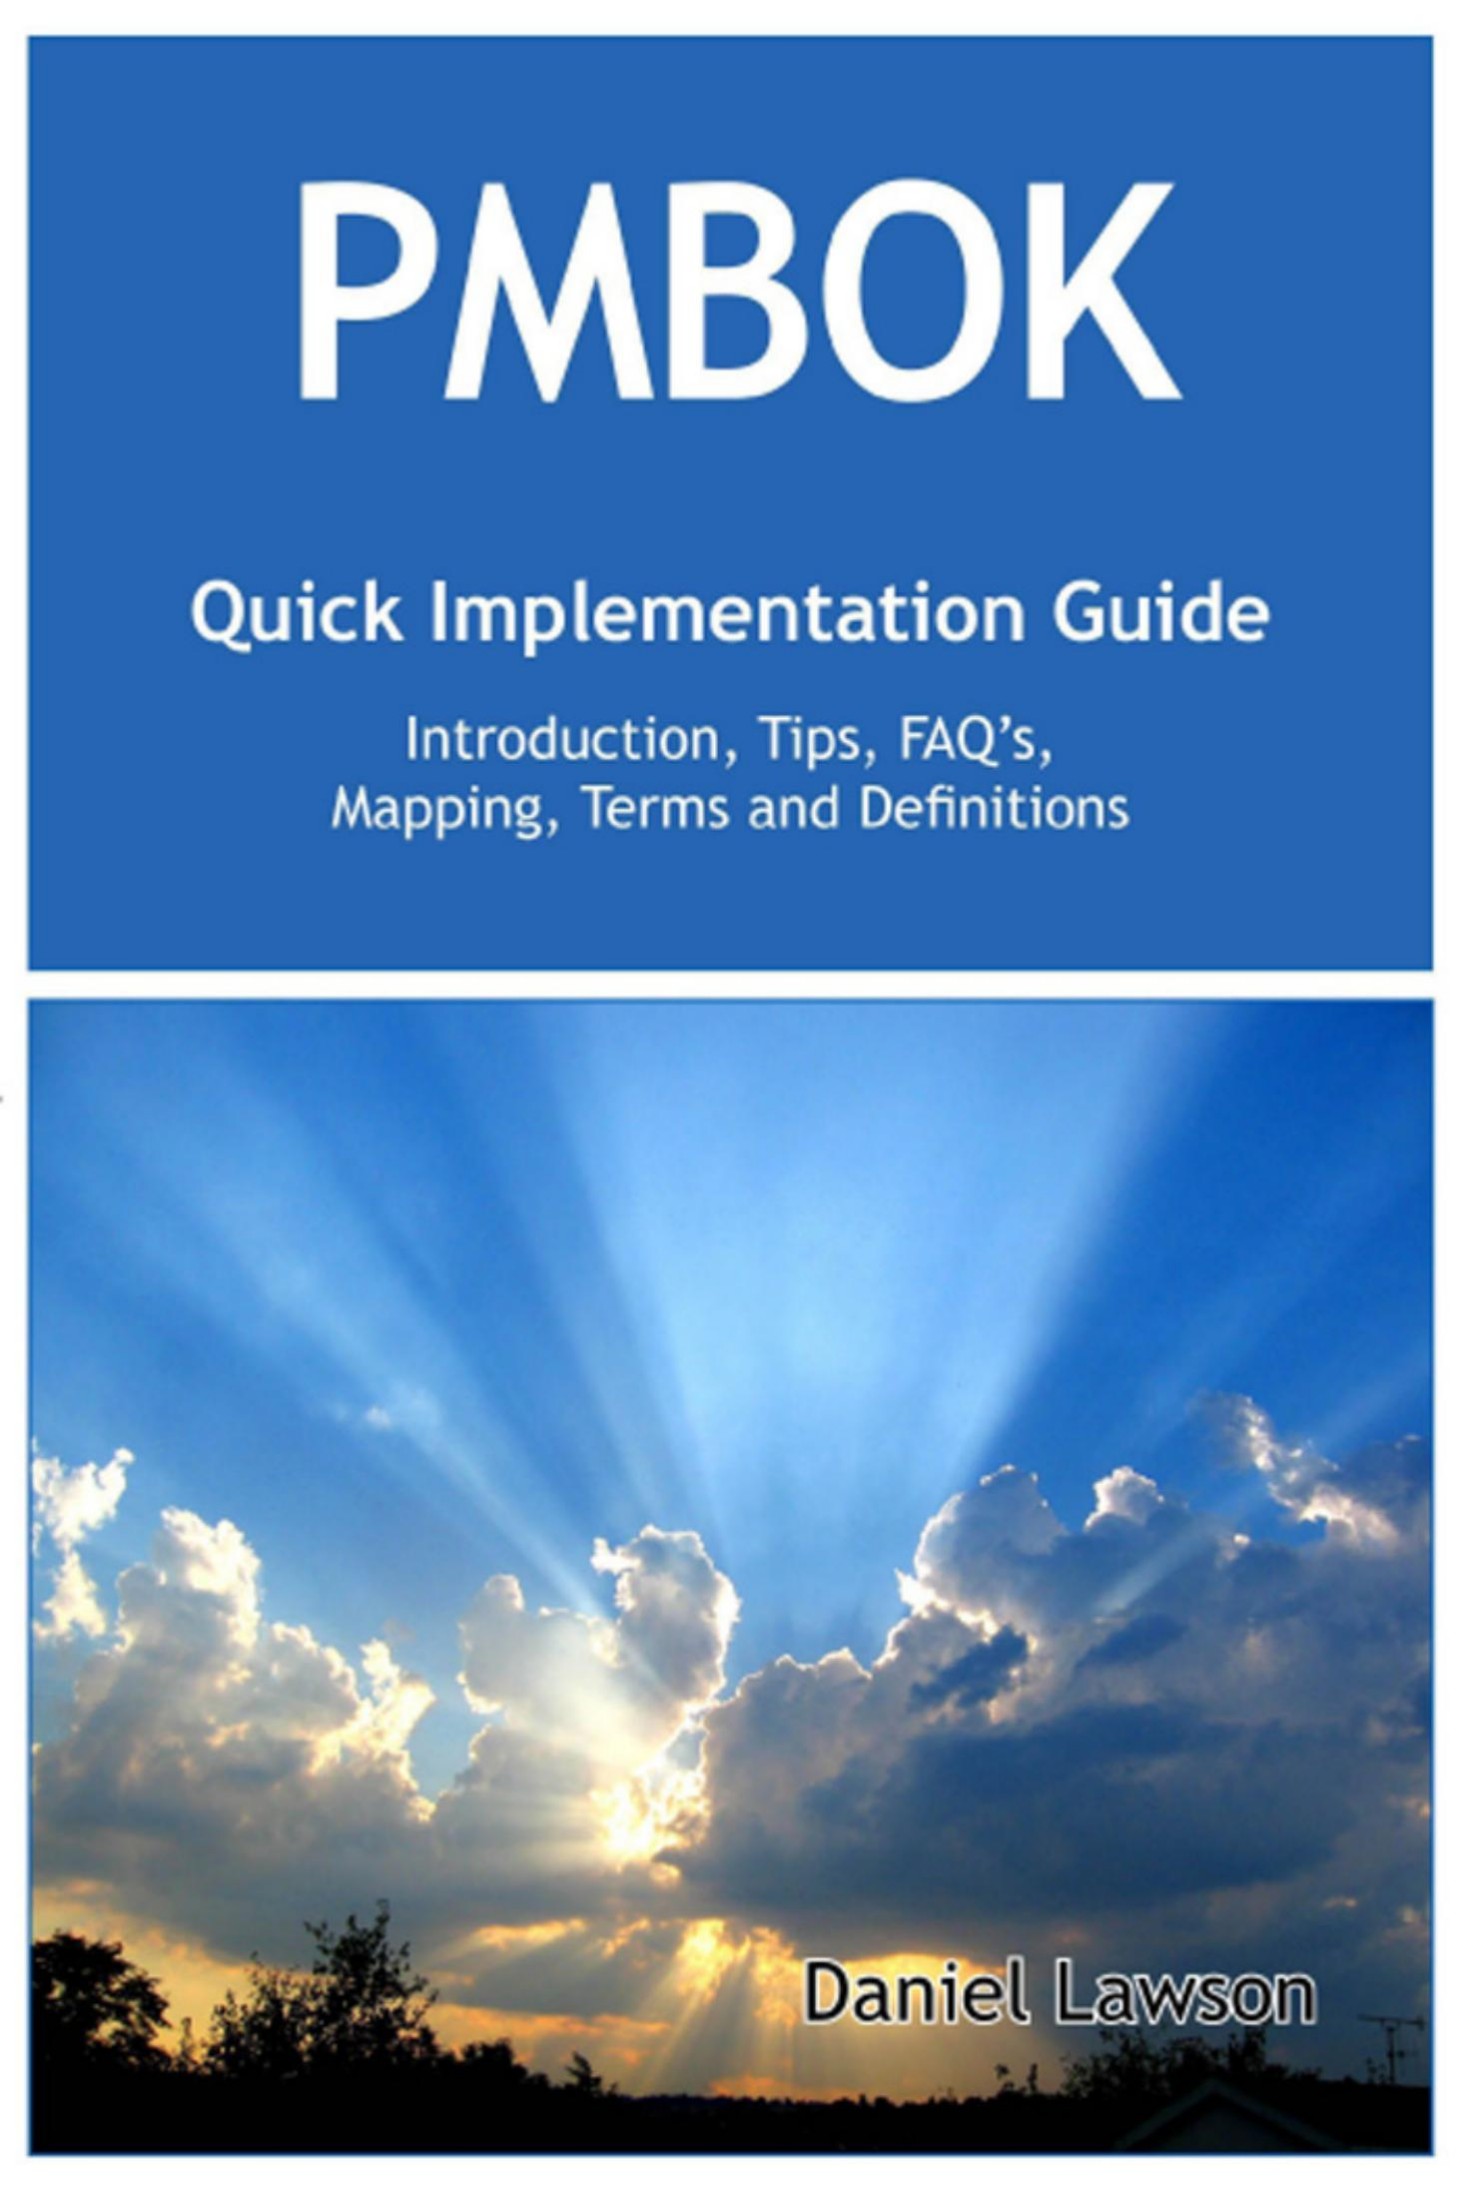 PMBOK® Quick Implementation Guide: Standard Introduction, Tips for Successful PMBOK® Managed Projects, FAQs, Mapping Responsibilities, Terms and Definitions